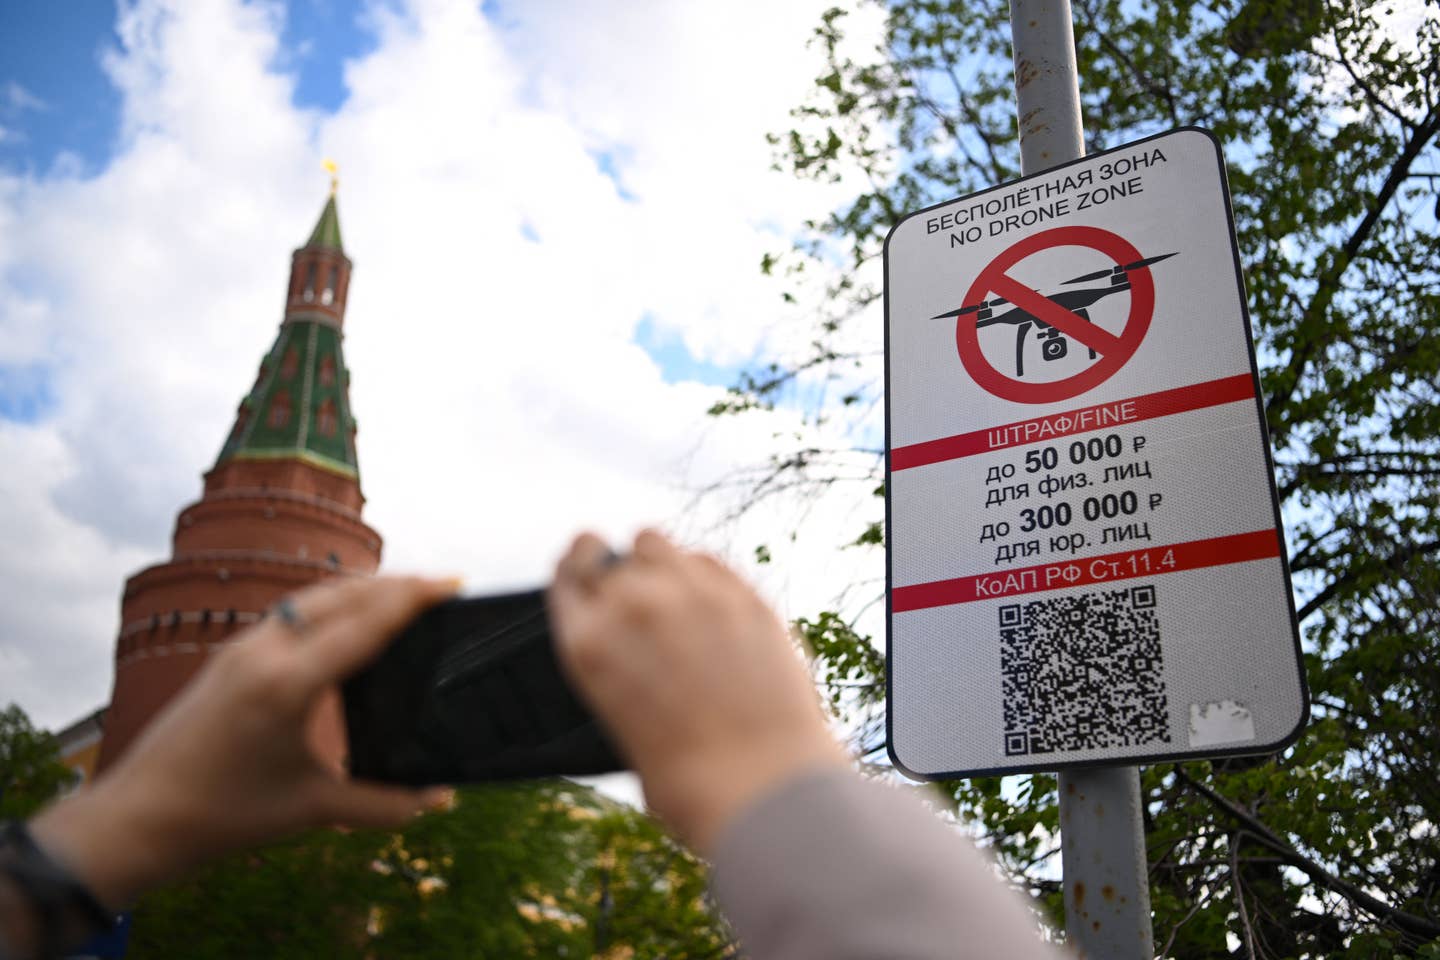 Moscow's mayor announced a ban on unauthorized drone flights over the Russian capital Wednesday after the Kremlin said it had shot down two Ukrainian drones targeting President Vladimir Putin. (Photo by NATALIA KOLESNIKOVA/AFP via Getty Images)